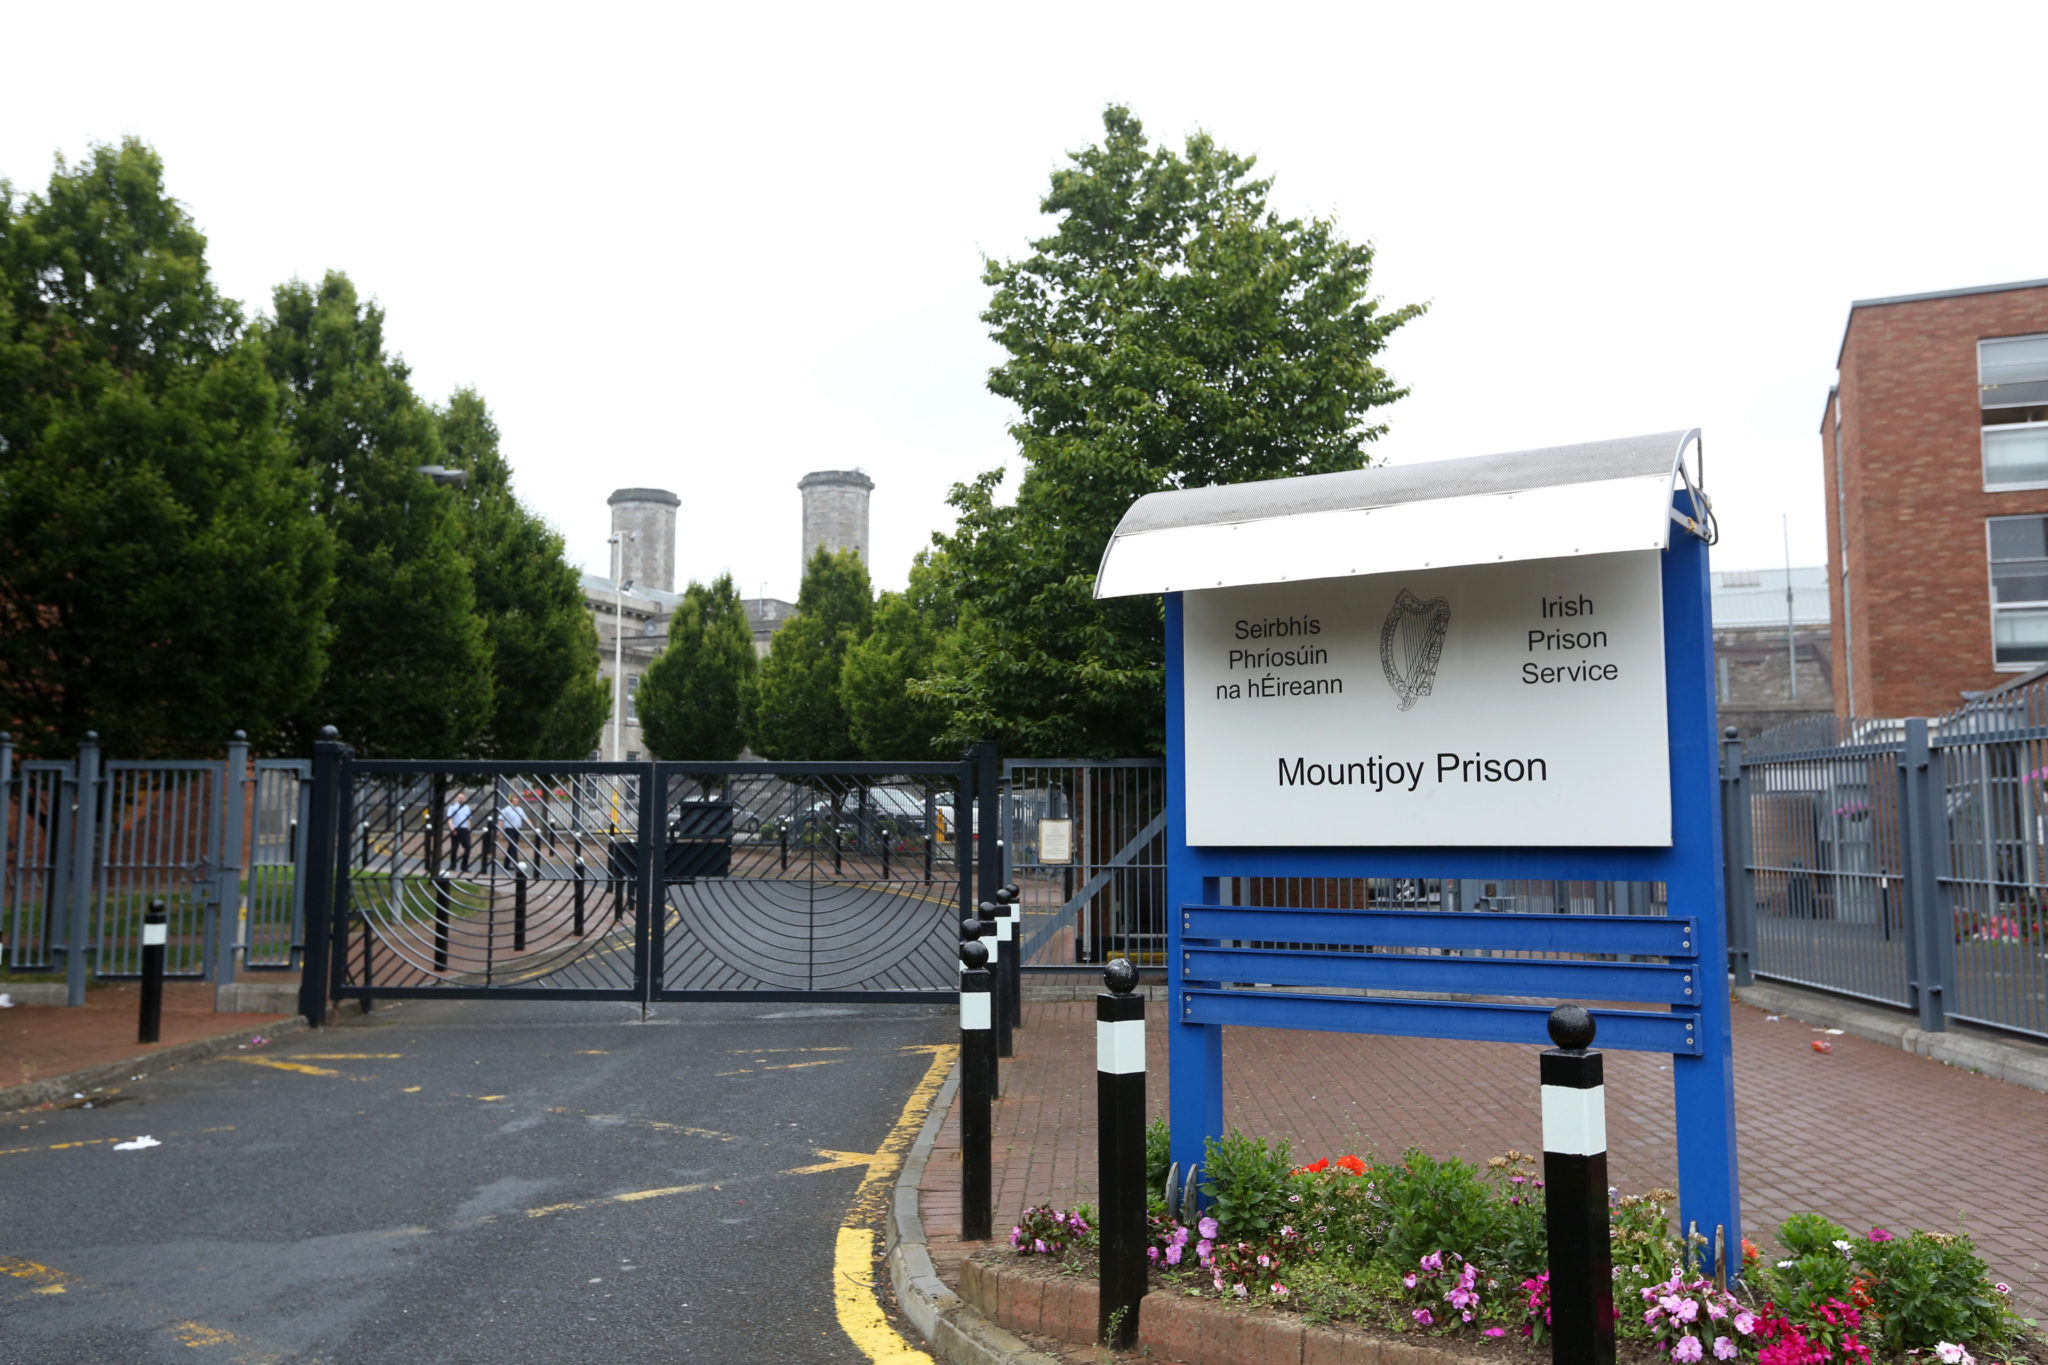 File photo of Mountjoy Prison in Dublin where a woman tested positive for COVID-19 at the Dóchas Centre